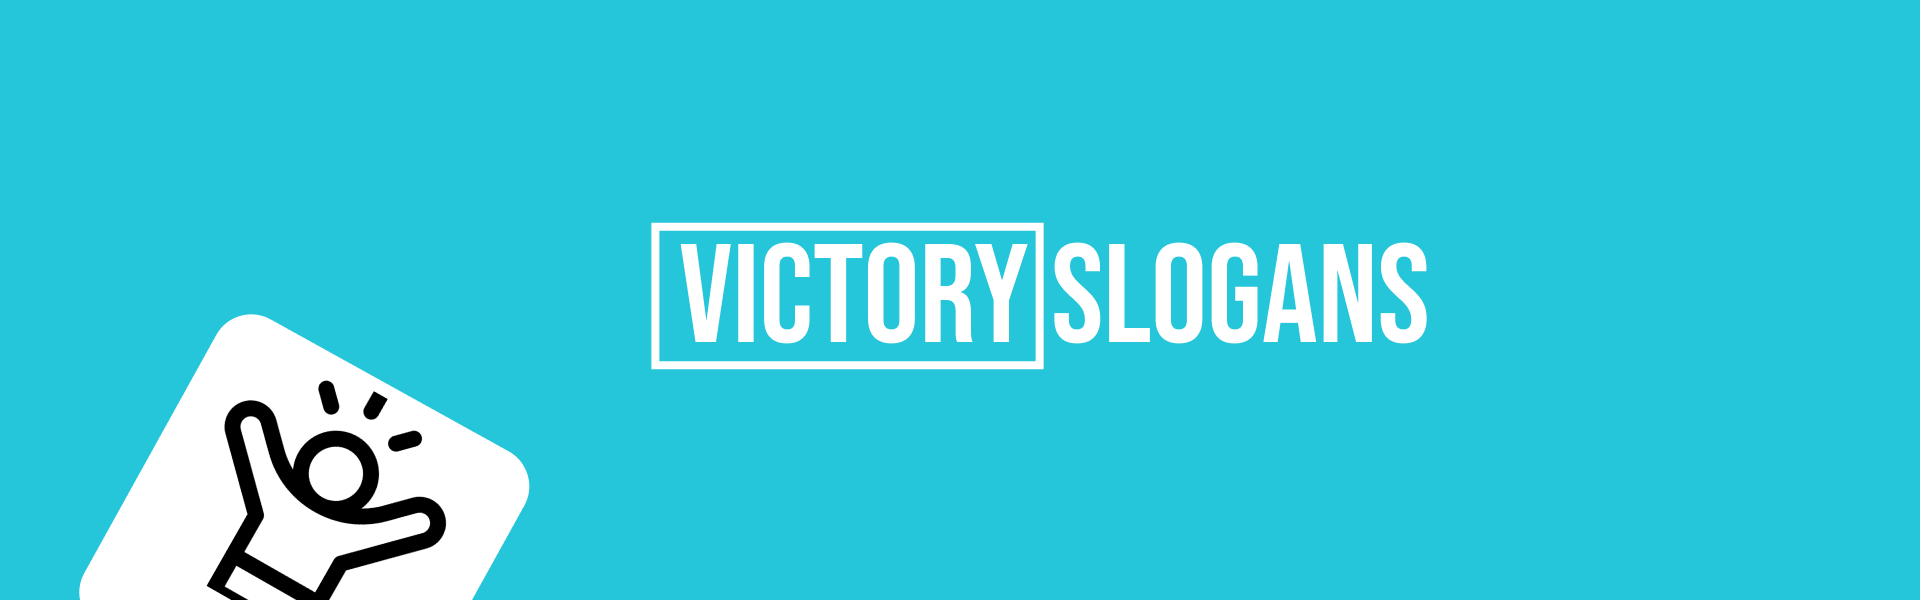 victory-slogans-featured